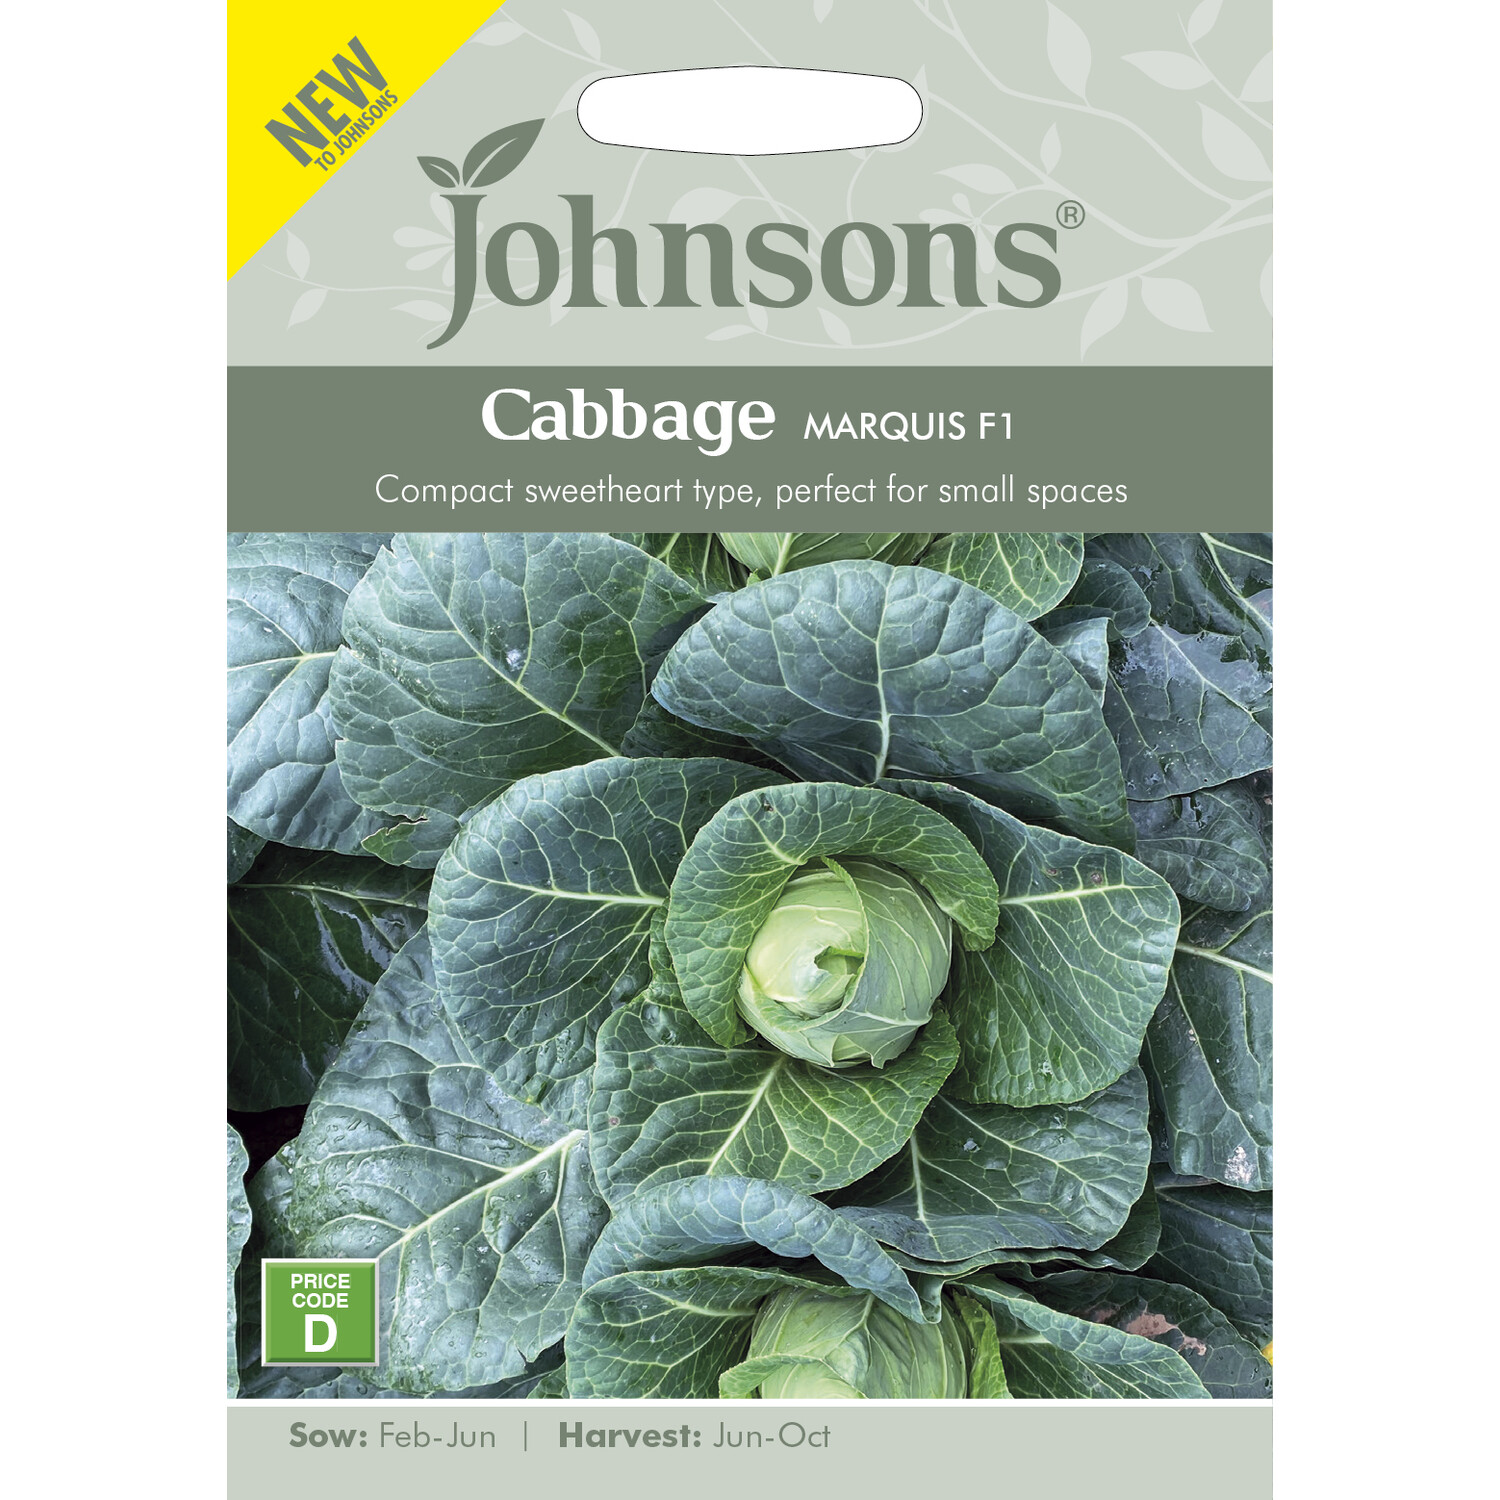 Johnsons Cabbage Marquis F1 Vegetable Seeds Image 2